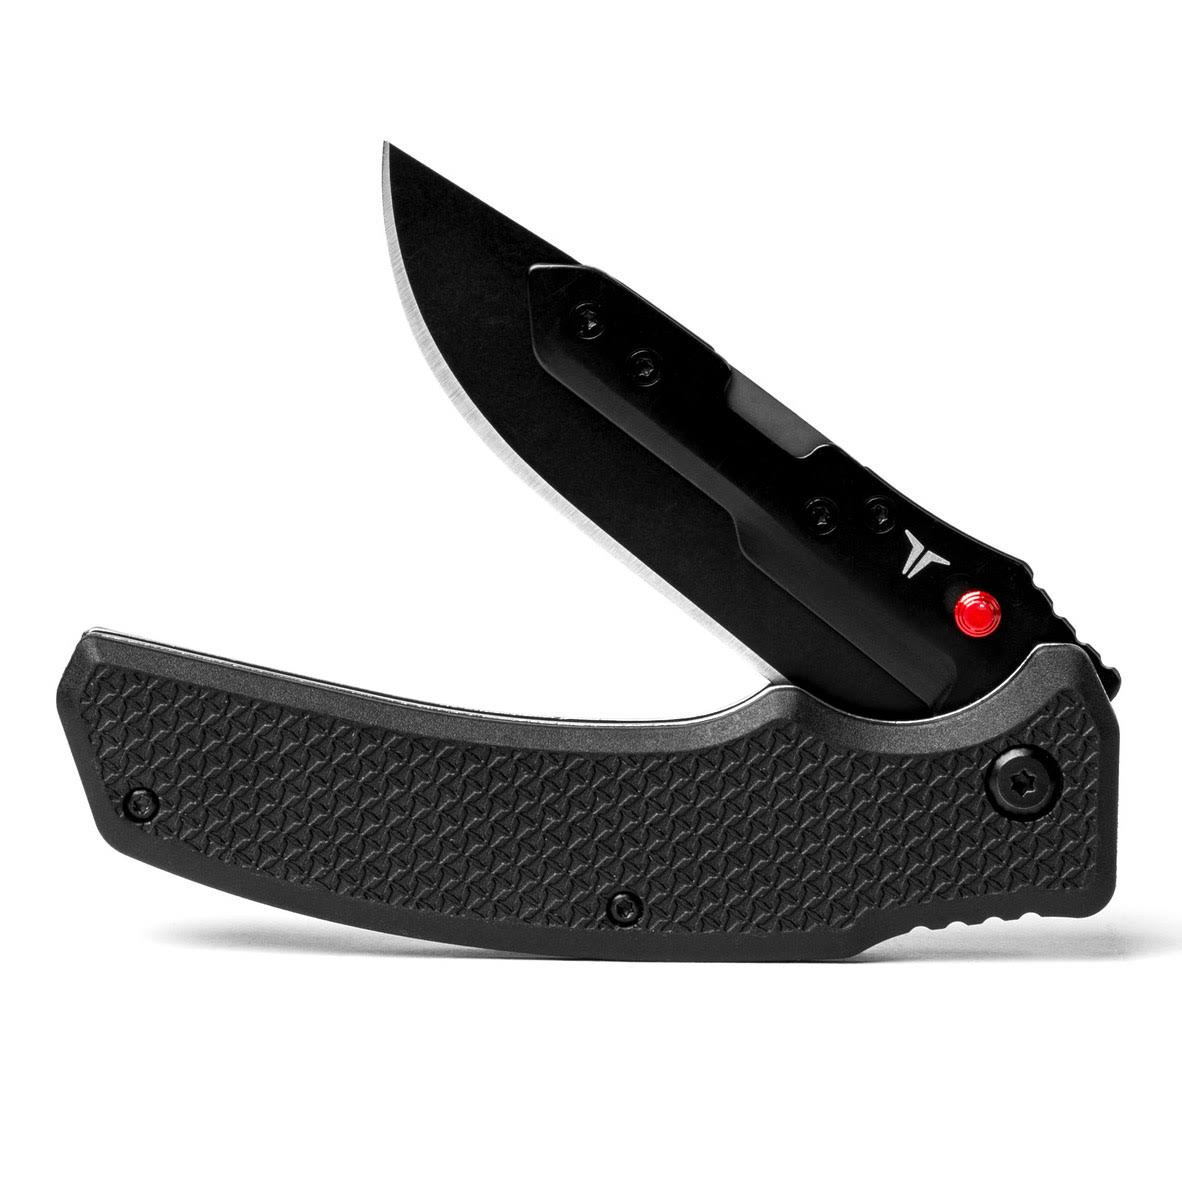 True Utility Replaceable Blade Knife